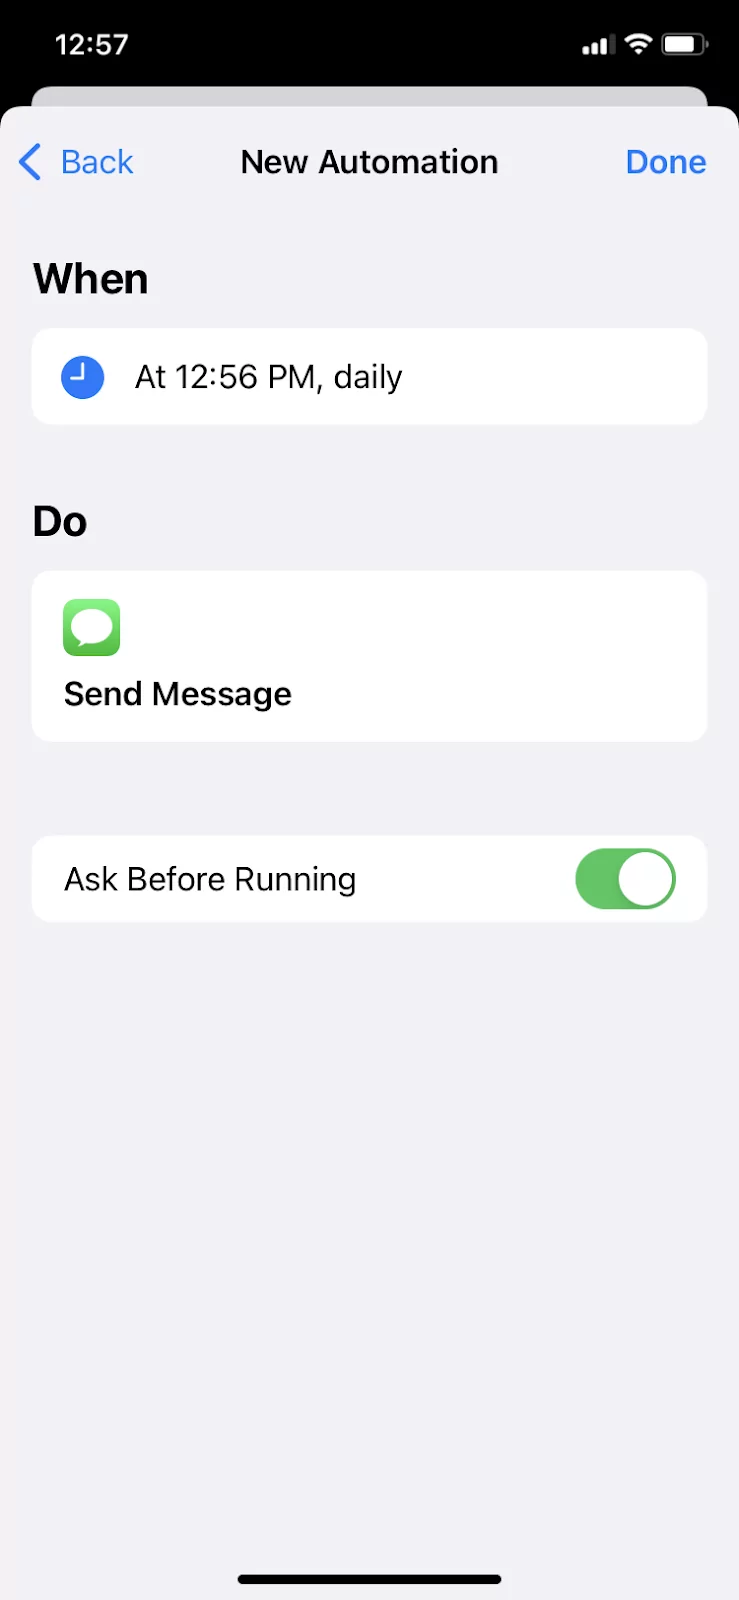 How to schedule a text: Created automation from instructions above on an iPhone. 